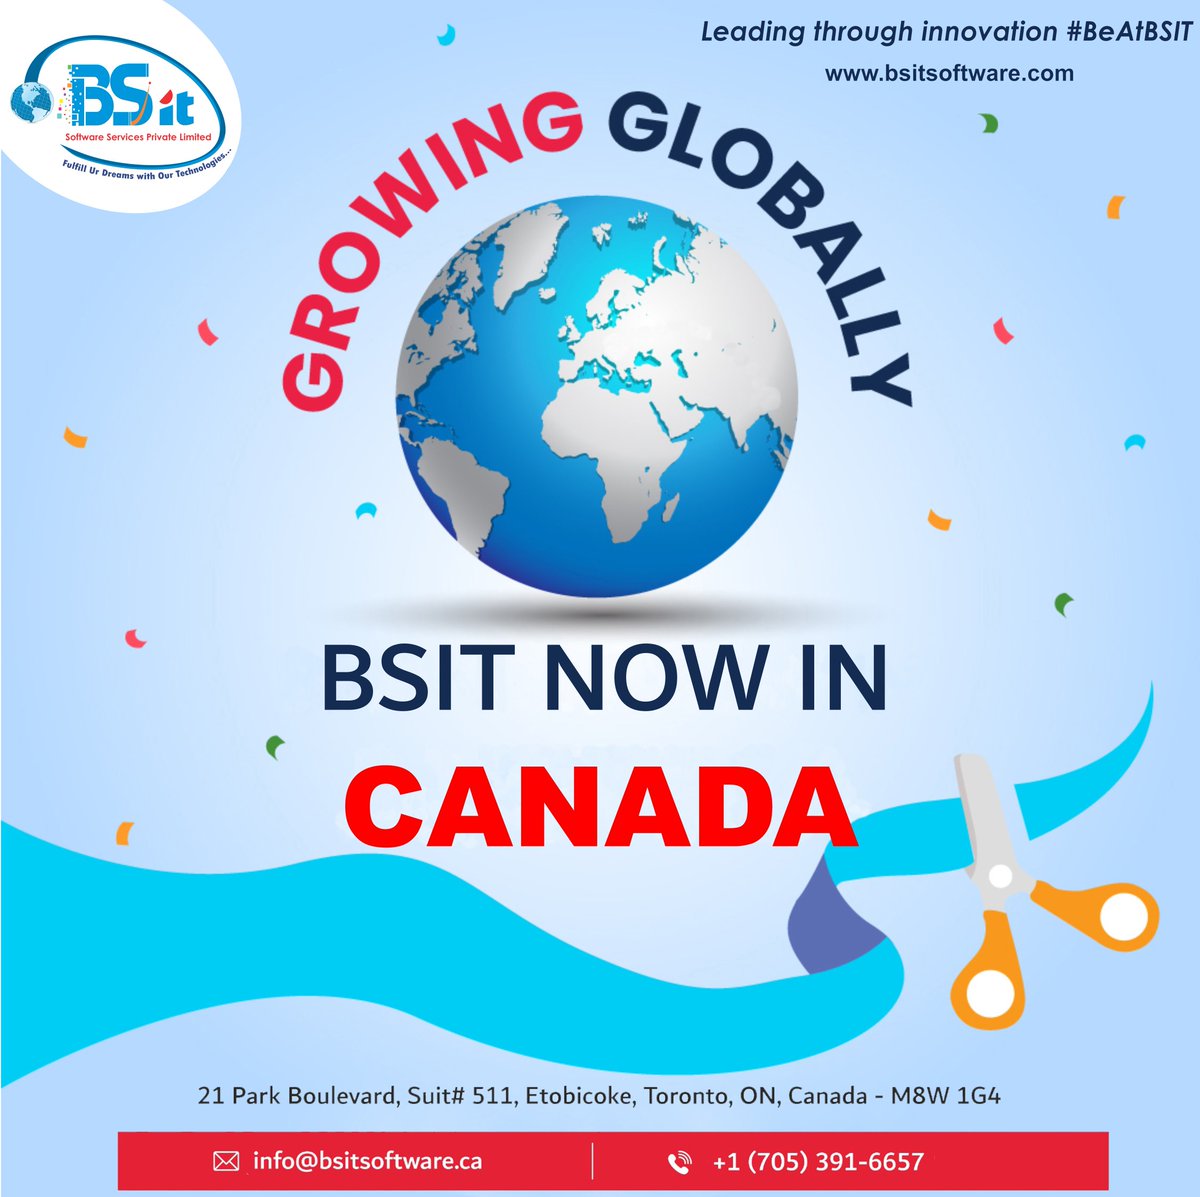 BSIT, a leading IT company, is excited to announce its expansion into Canada, marking a significant milestone in its global growth strategy.

 #bsitsoftware #bsit #bsitsoftwareservices #BSITSoftware #BSITCanada #BSITSoftwarePrivateLimited #BSIT #BeAtBSIT #BSITSoftwareServices